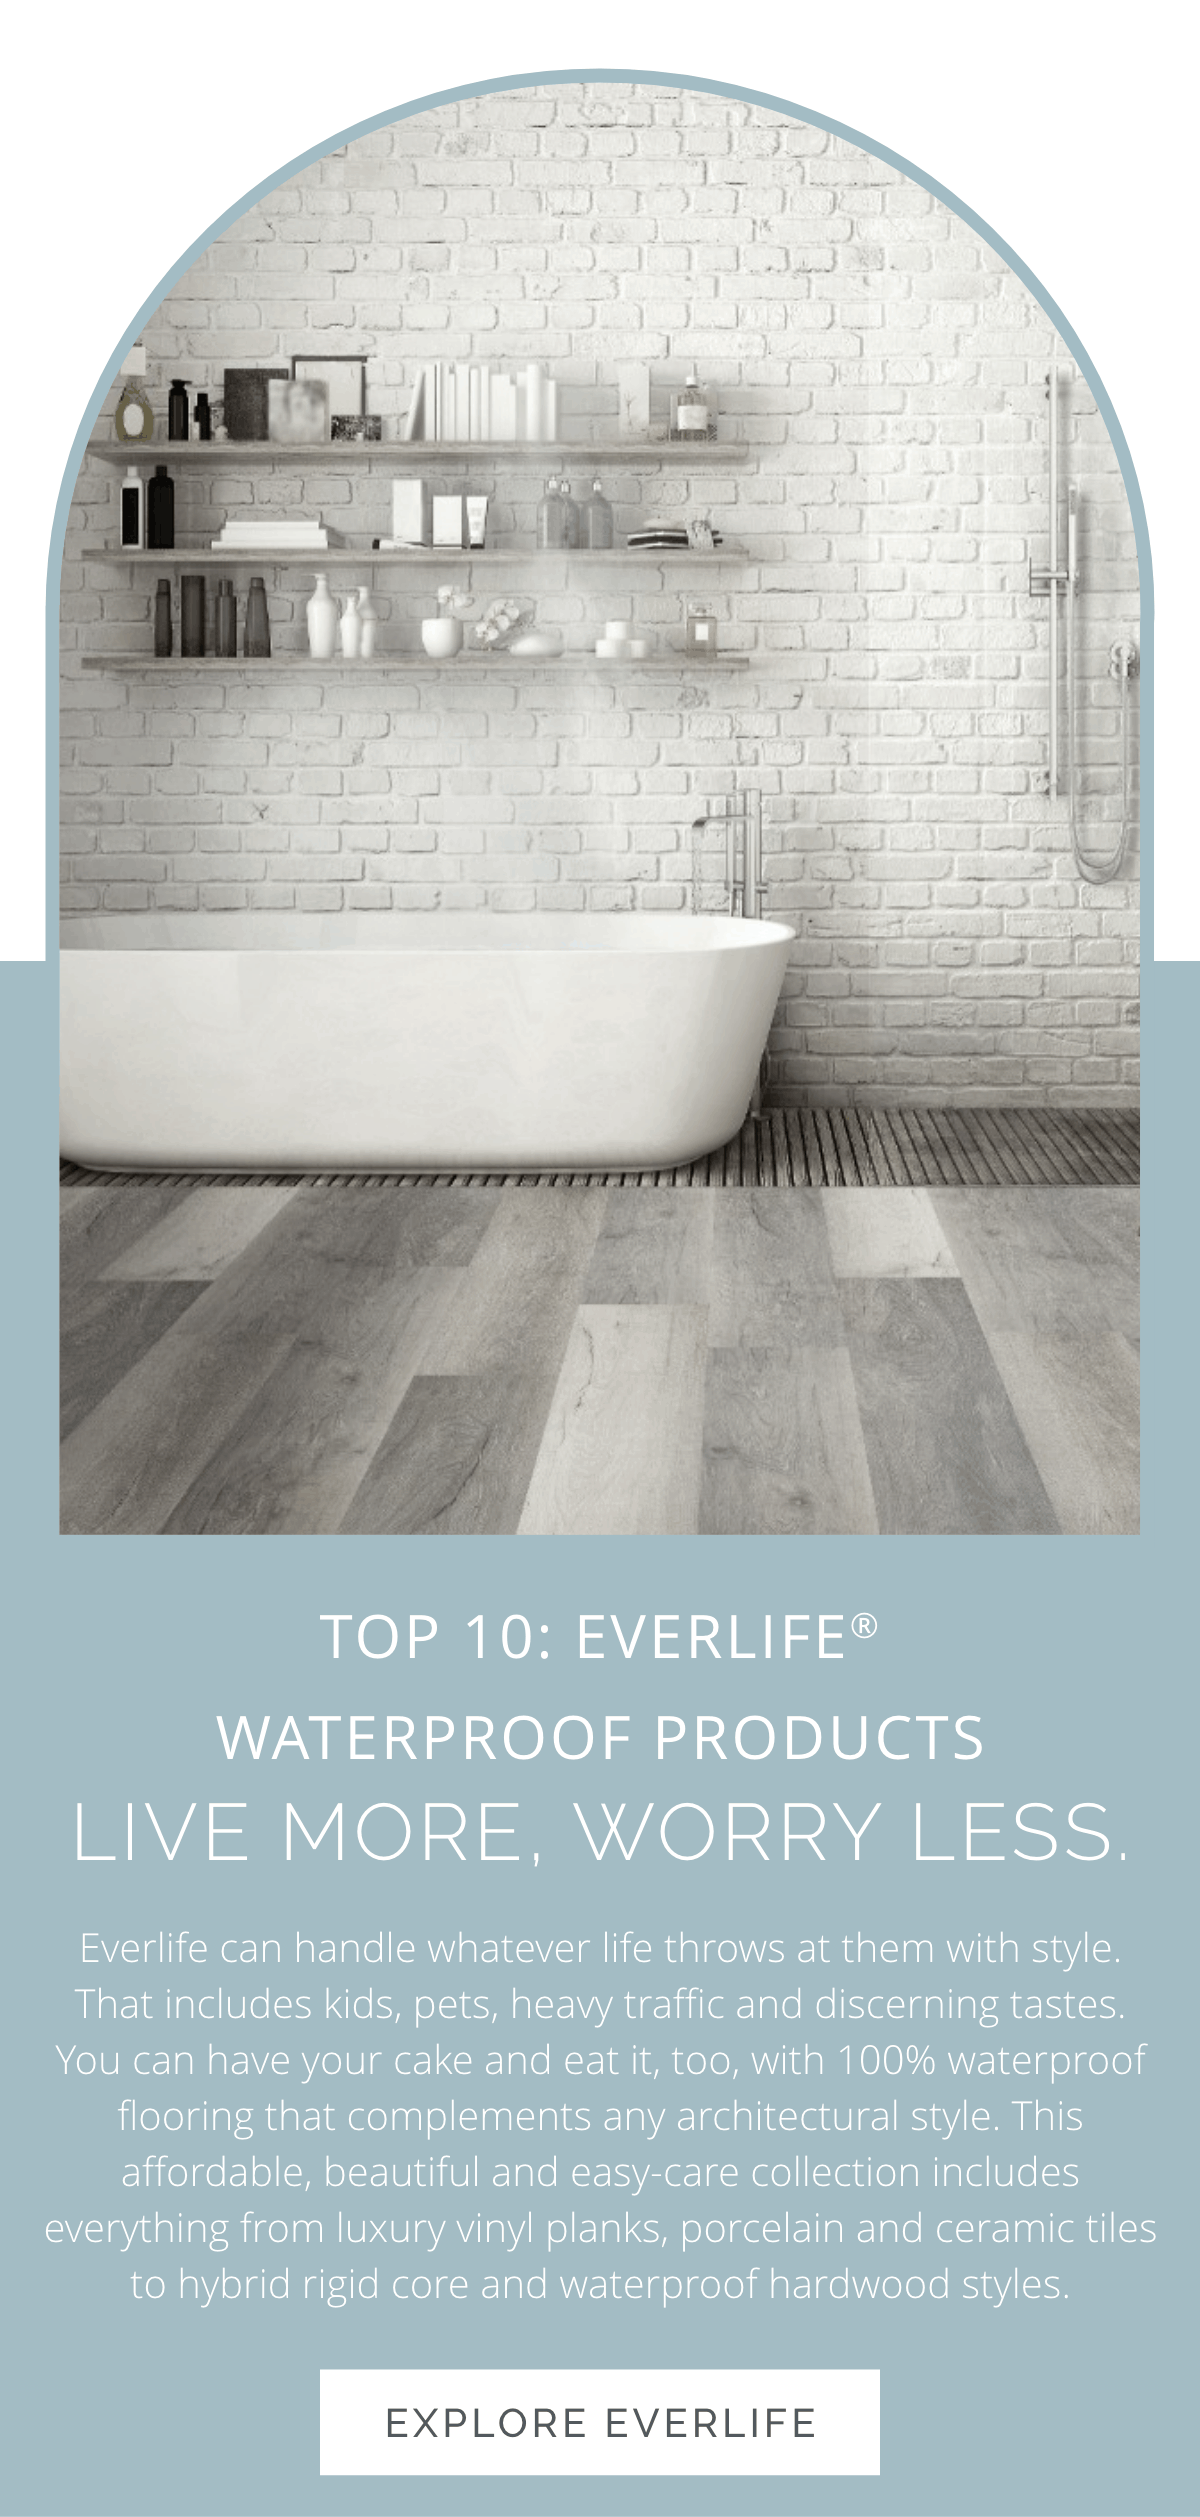 Everlife Waterproof Products